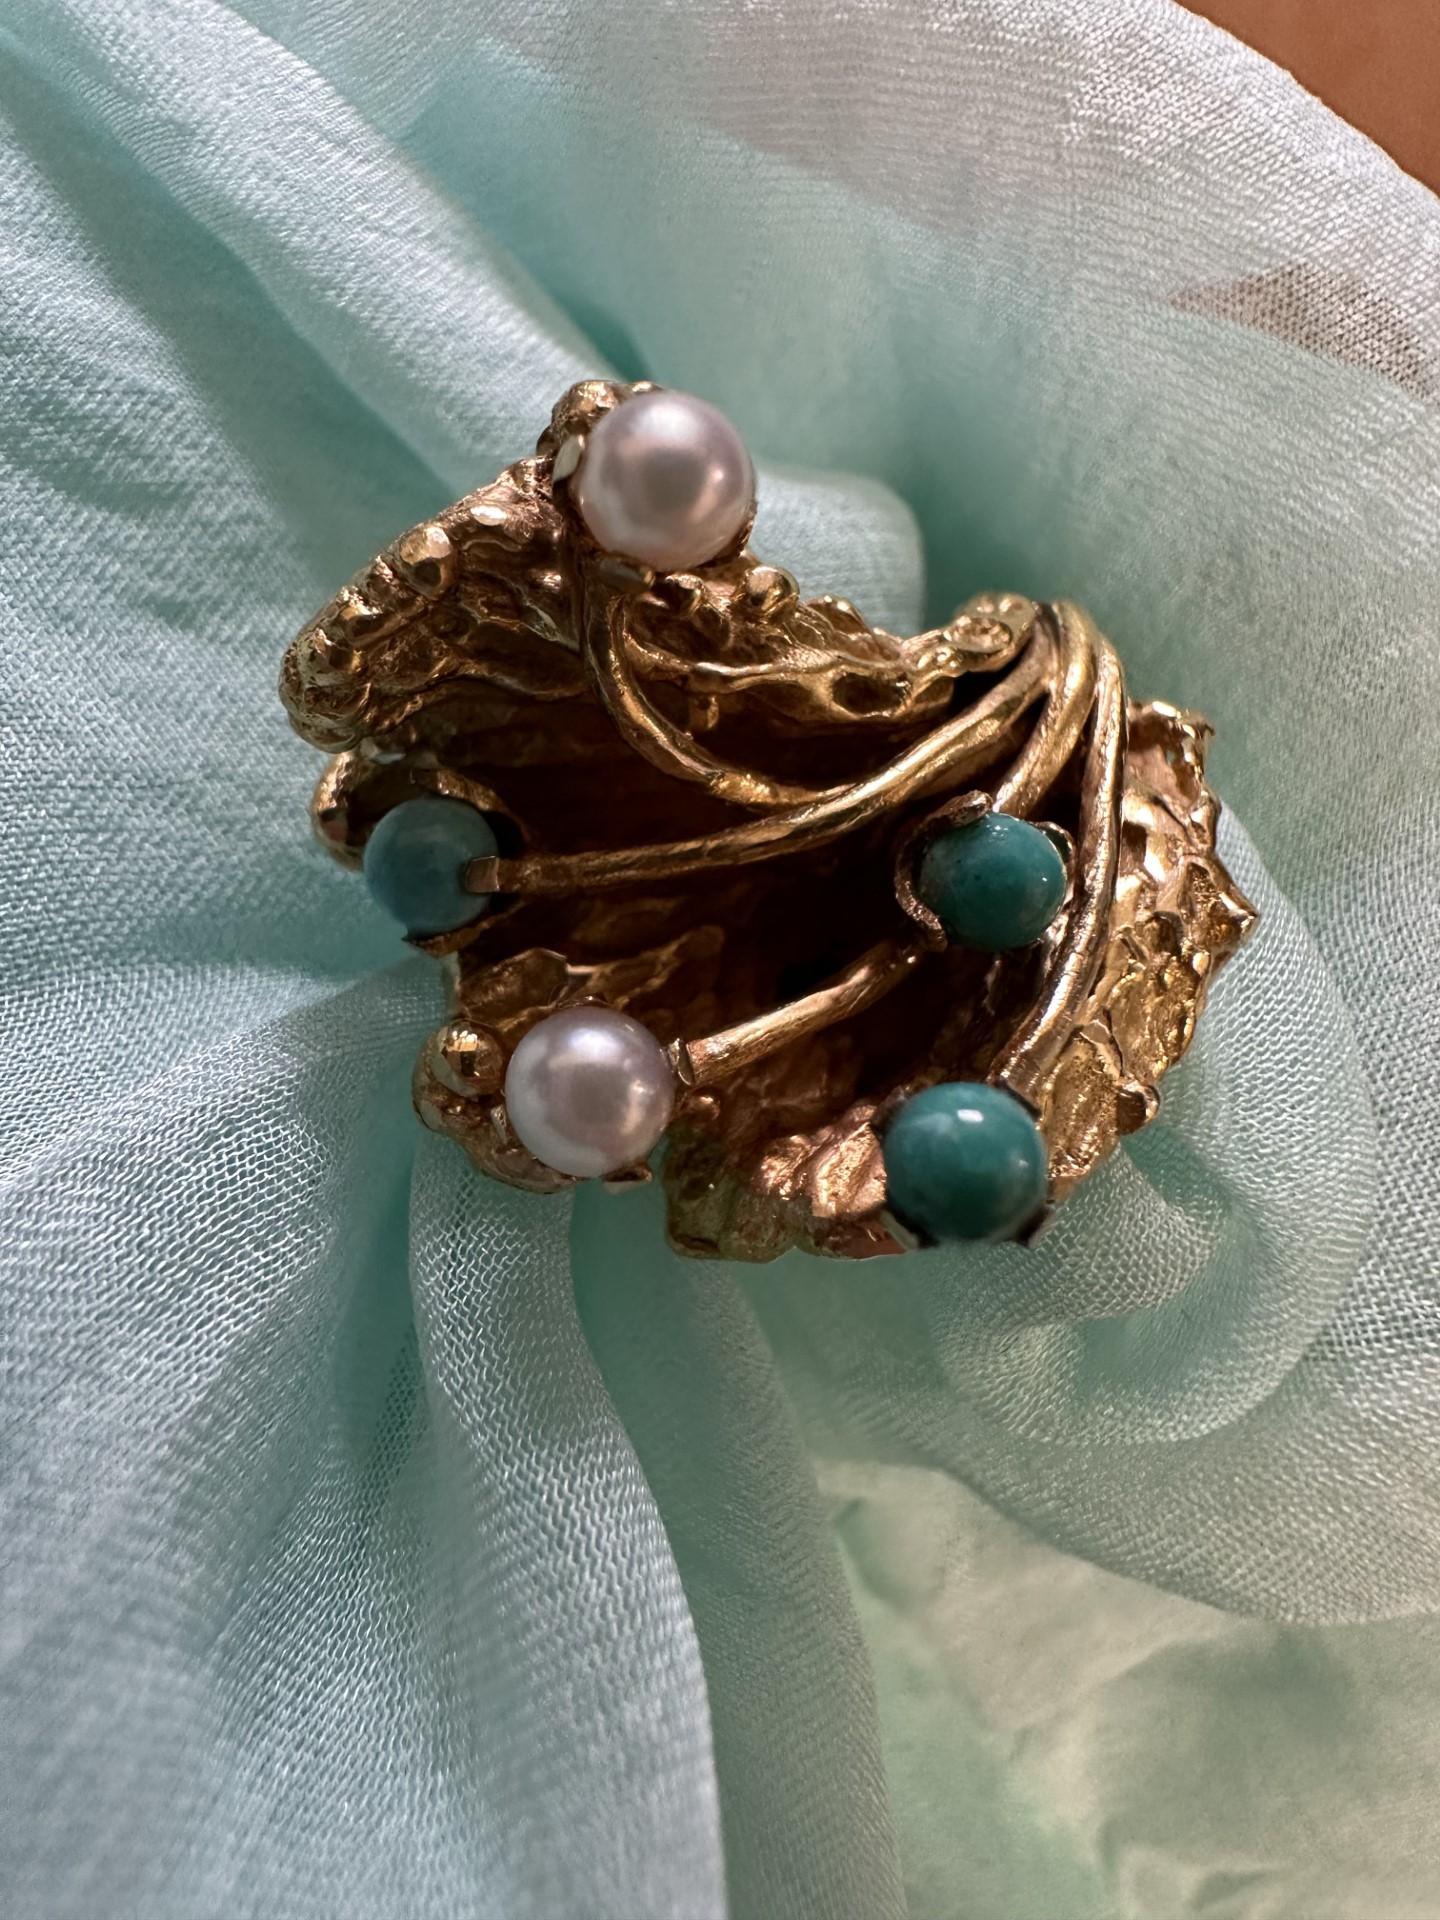 Turquoise & Pearl ring 18KT gold unique sea designer ring handcarved cocktail  In Excellent Condition For Sale In Boca Raton, FL